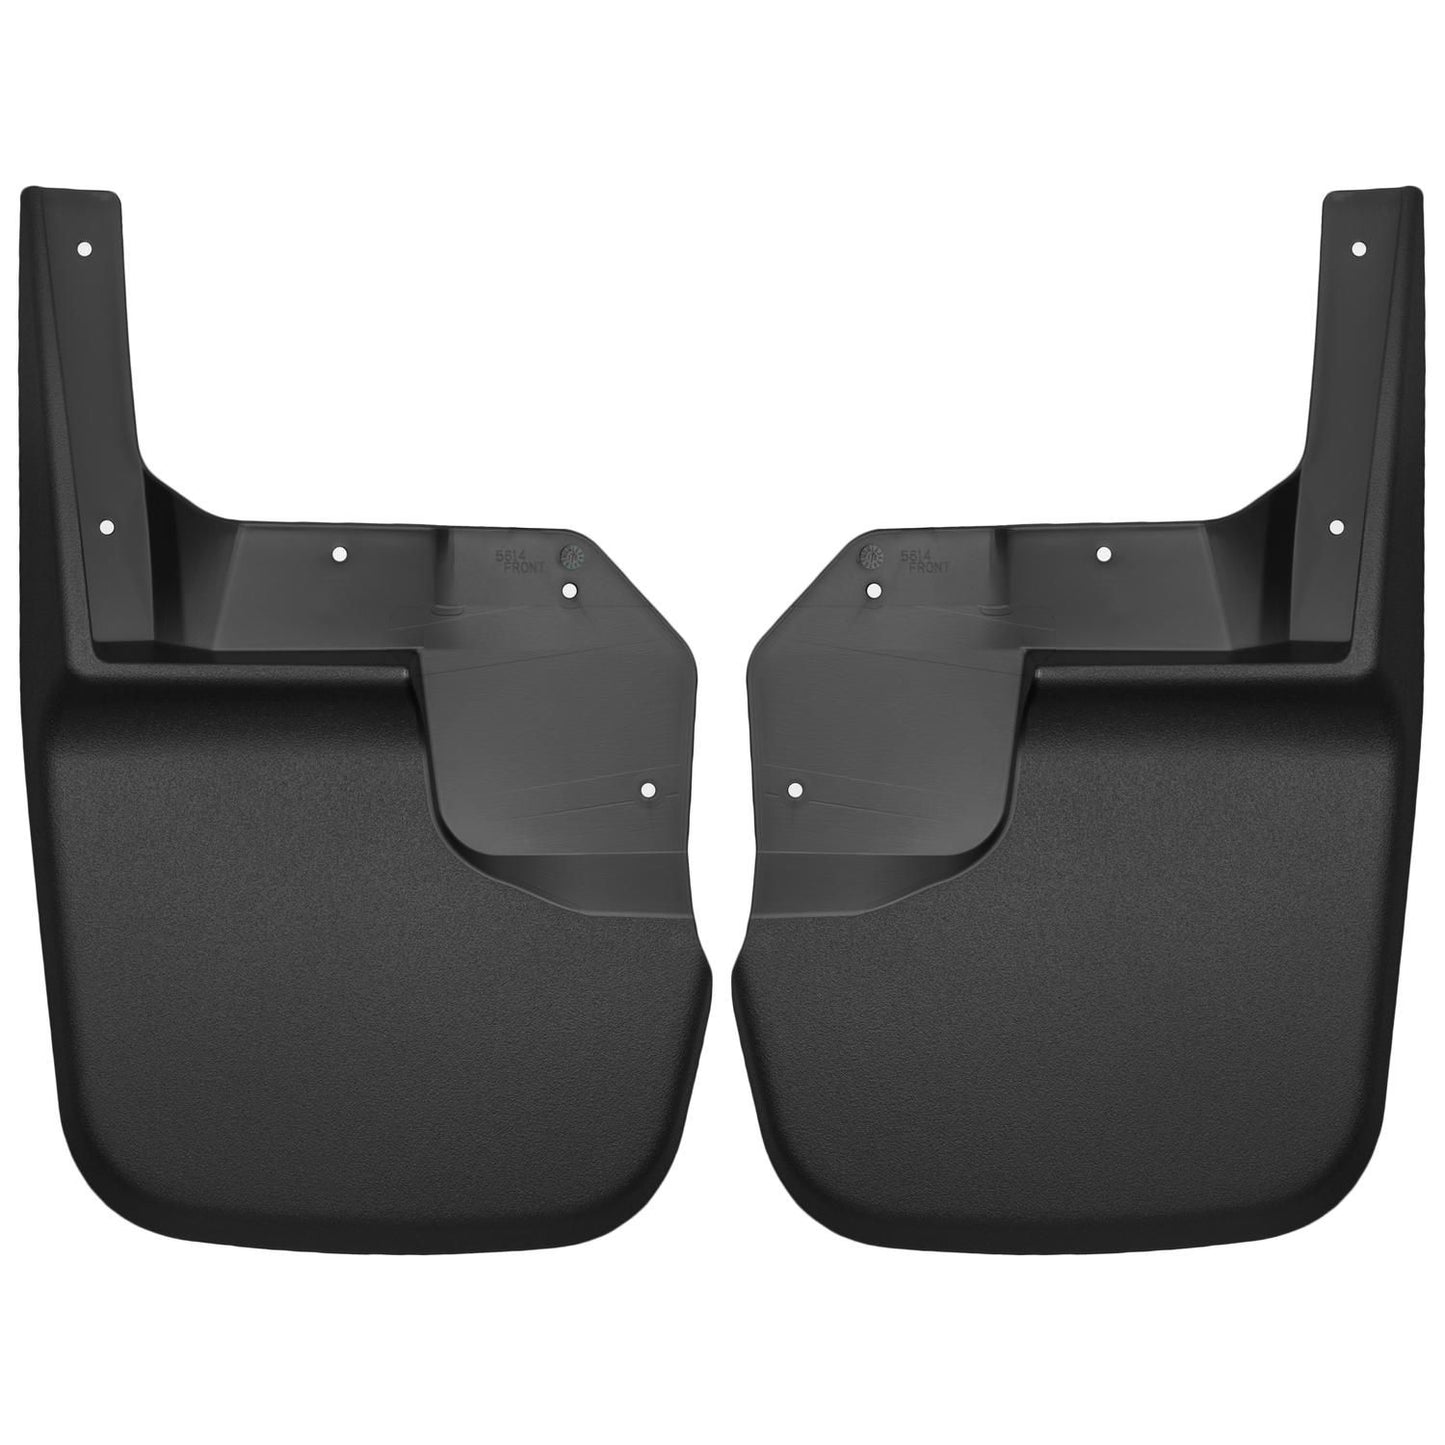 Husky Liners Front Mud Guards 56141